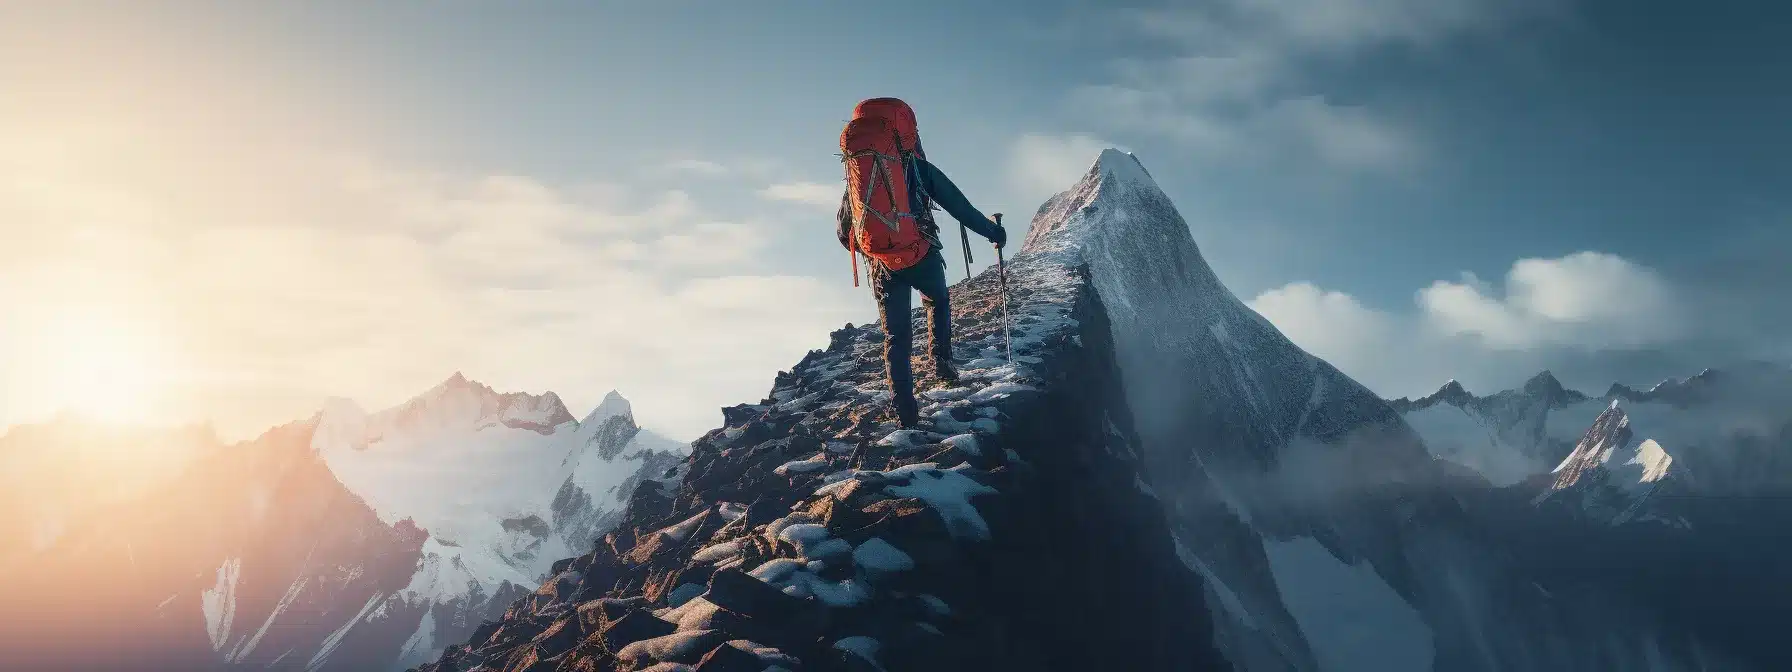 A Mountaineer Climbing A Towering Peak.